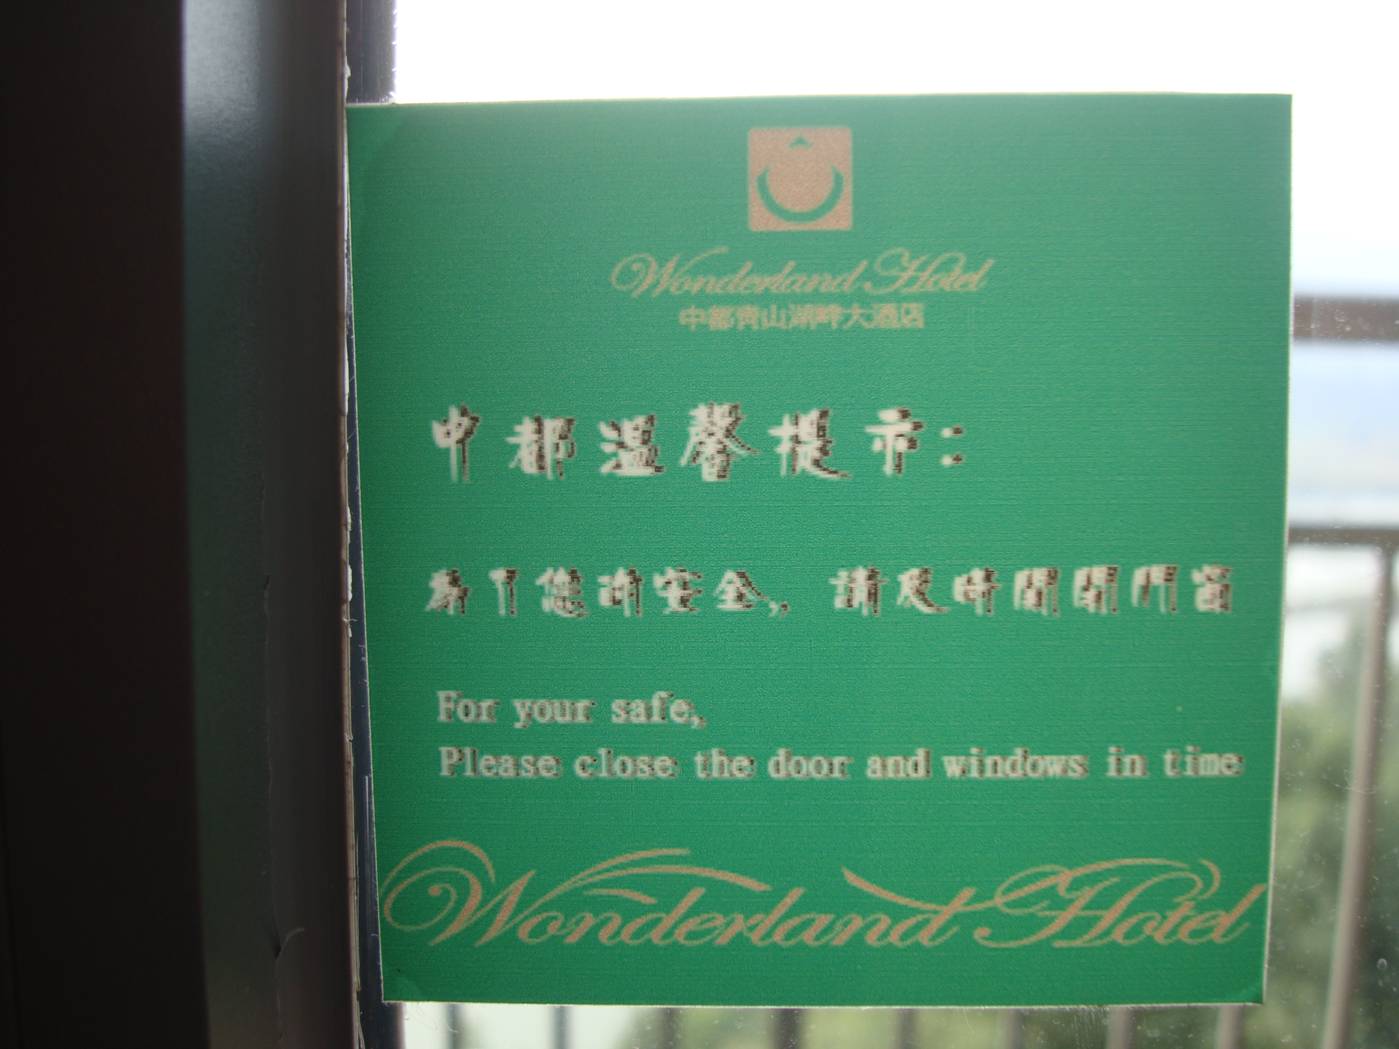 Picture: The enigmatic Chinglish notice on our hotel room balcony door:  For your safe, Please close the door and windows in time.  Wonderland Hotel, Zhejiang Province, China